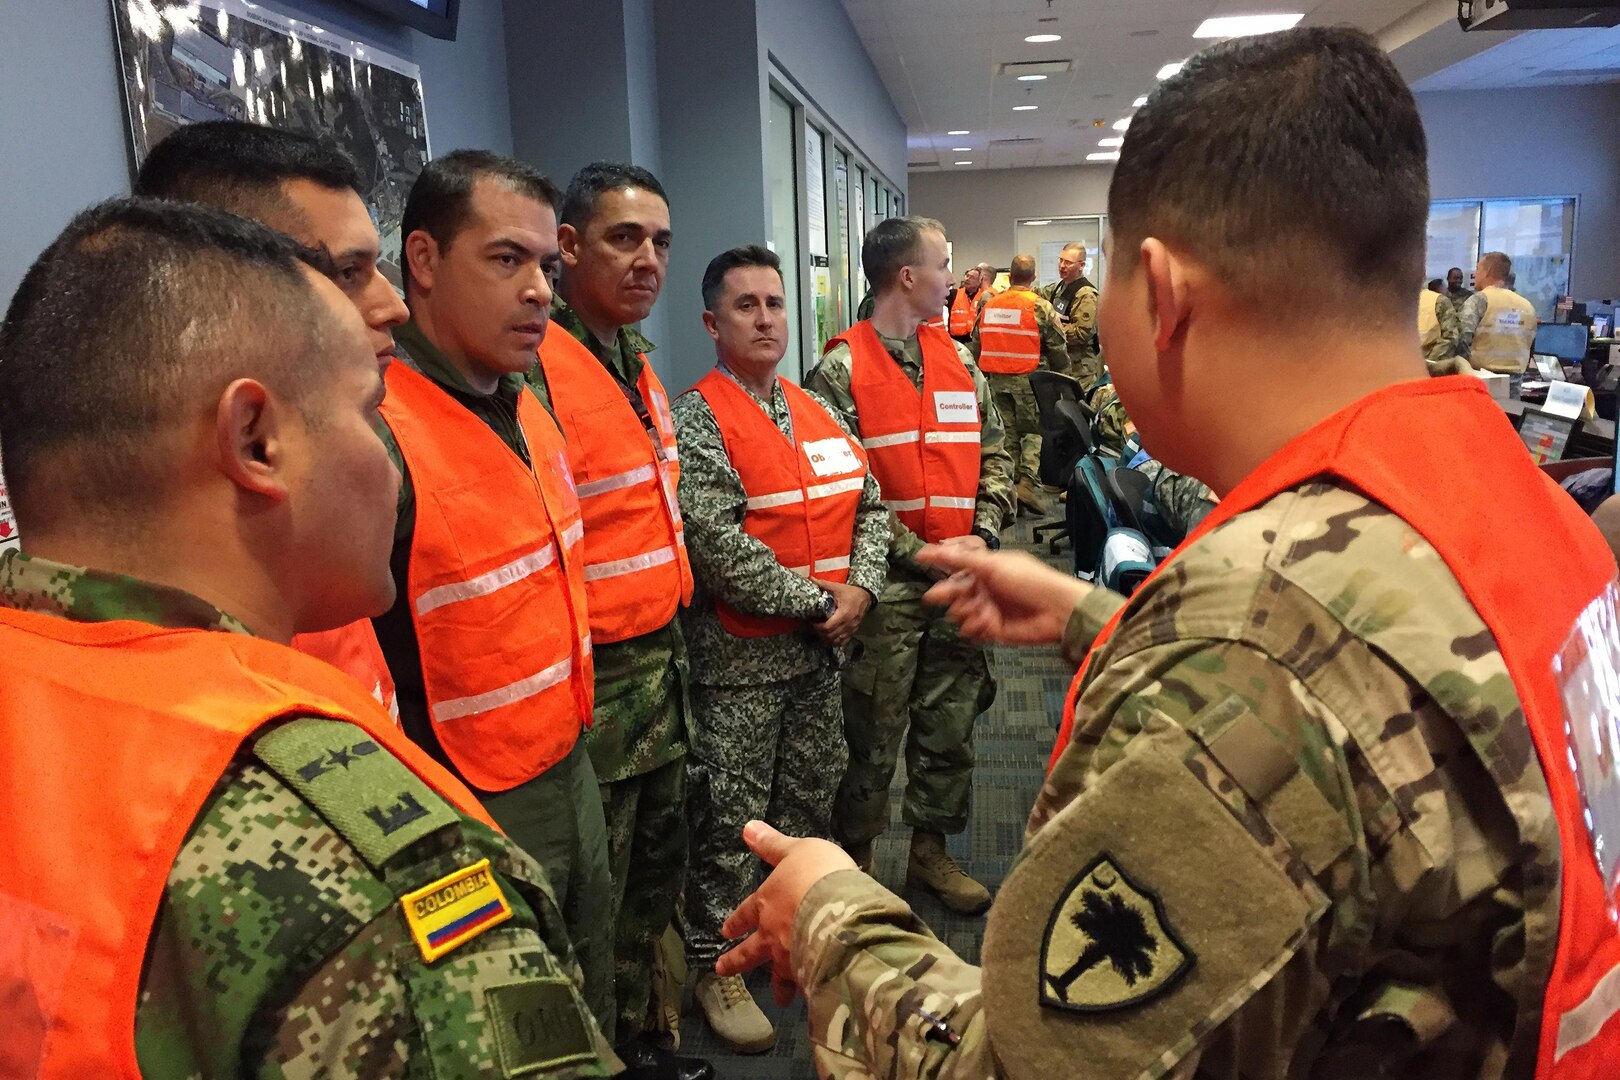 U.S. Army Sgt. Alex Chavez, right, a Soldier with the South Carolina Army National Guard, answers questions and translates into Spanish during a tour of the Georgia National Guard’s Joint Operations Center at the Clay National Guard Center in Marietta, Ga., March 30, 2017. Five officers from the Colombian military toured multiple sites in Georgia during the National Guard’s Defense Support to Civilian Agencies exercise called Vigilant Guard. The South Carolina National Guard is partnered with Colombia through the State Partnership Program and hosted the Colombian officers.